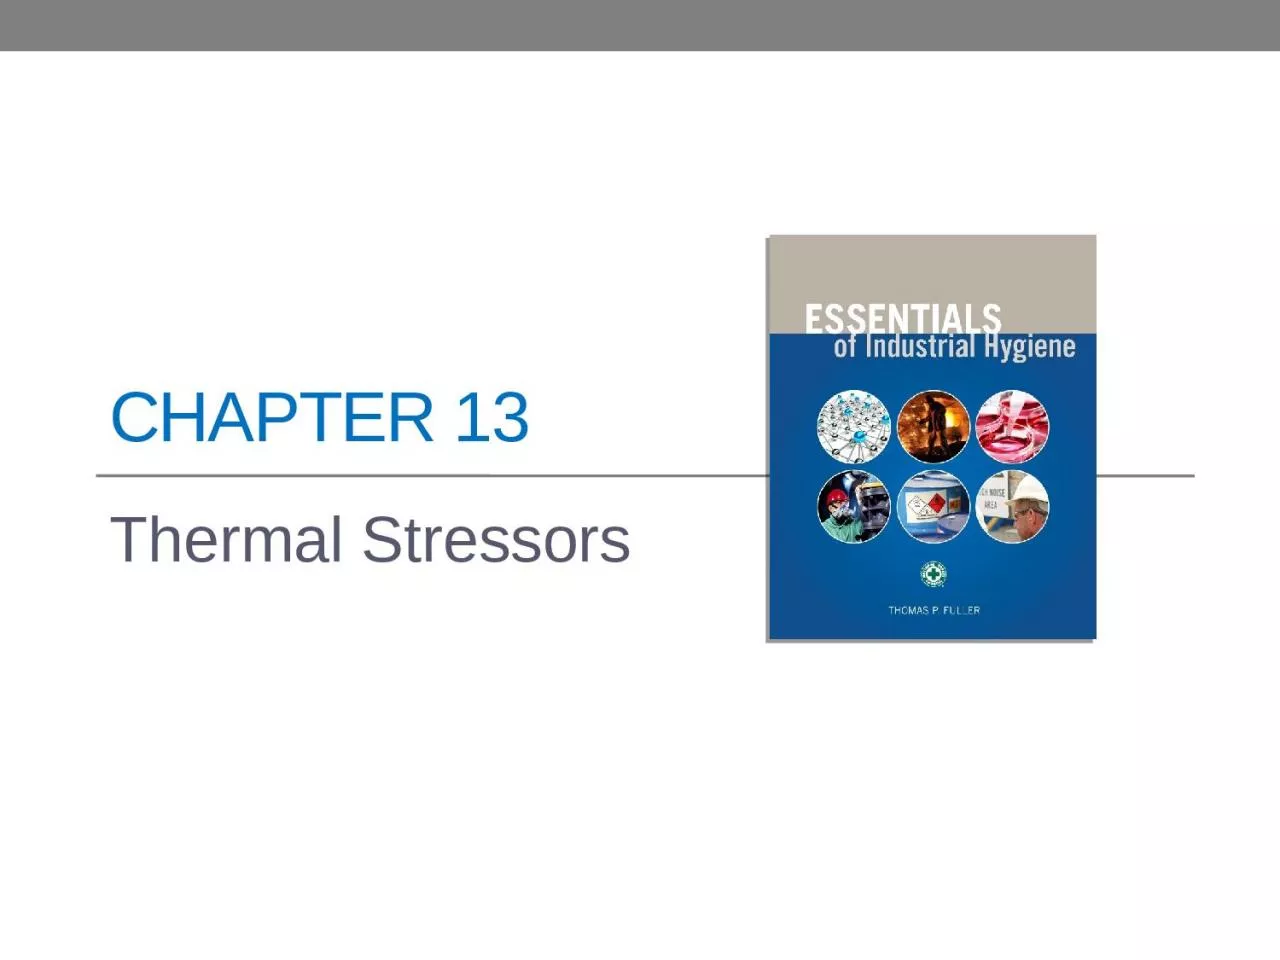 CHAPTER 13 Thermal Stressors